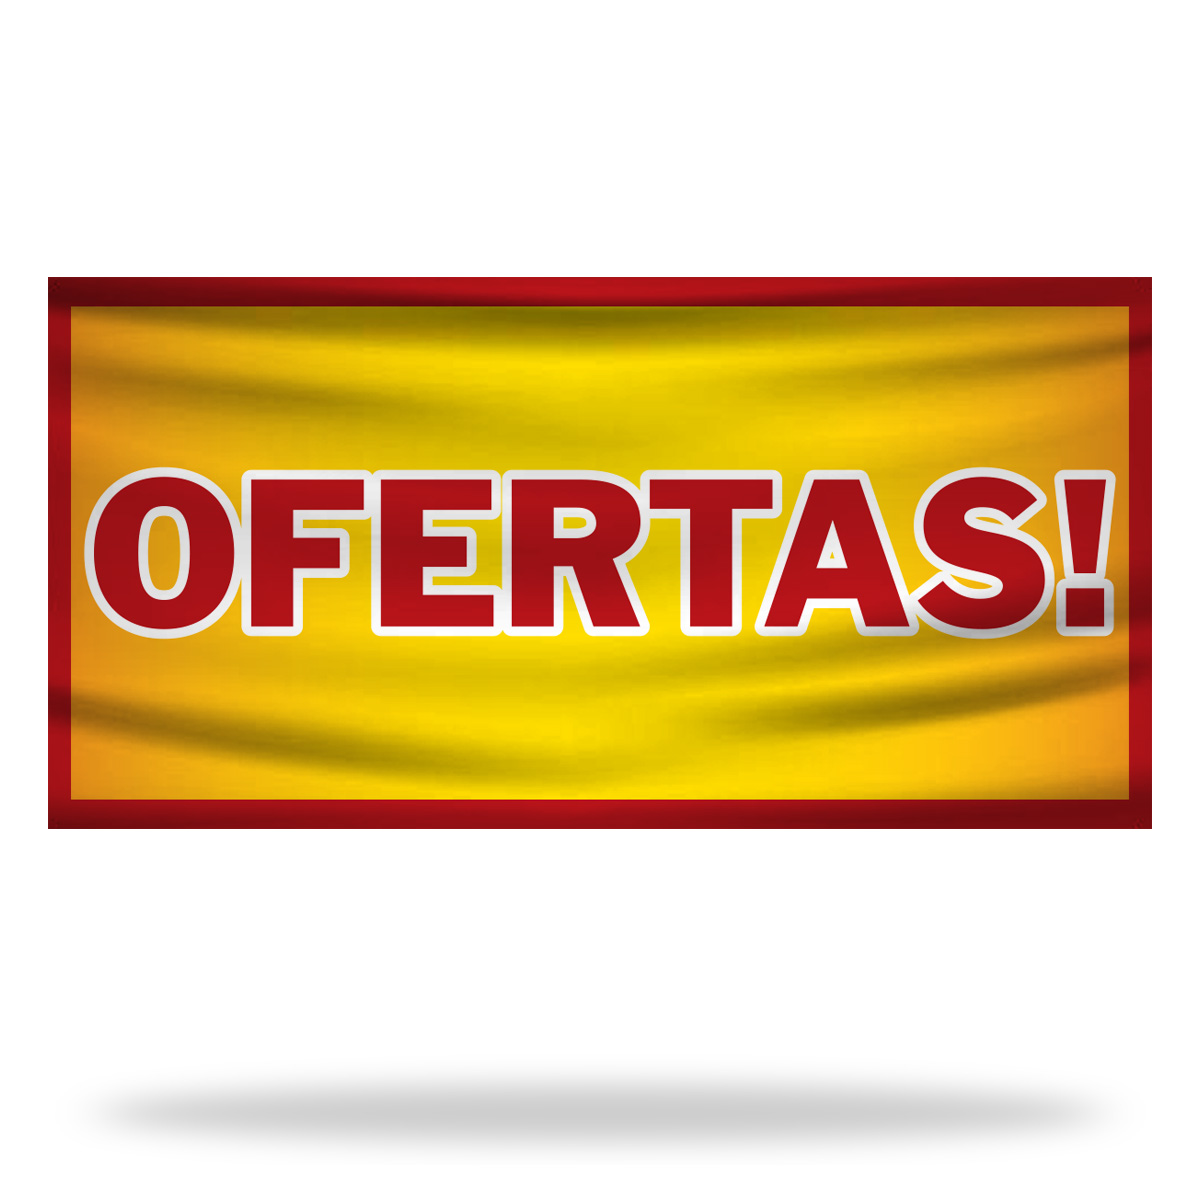 Spanish Offer Flags & Banners Design 01